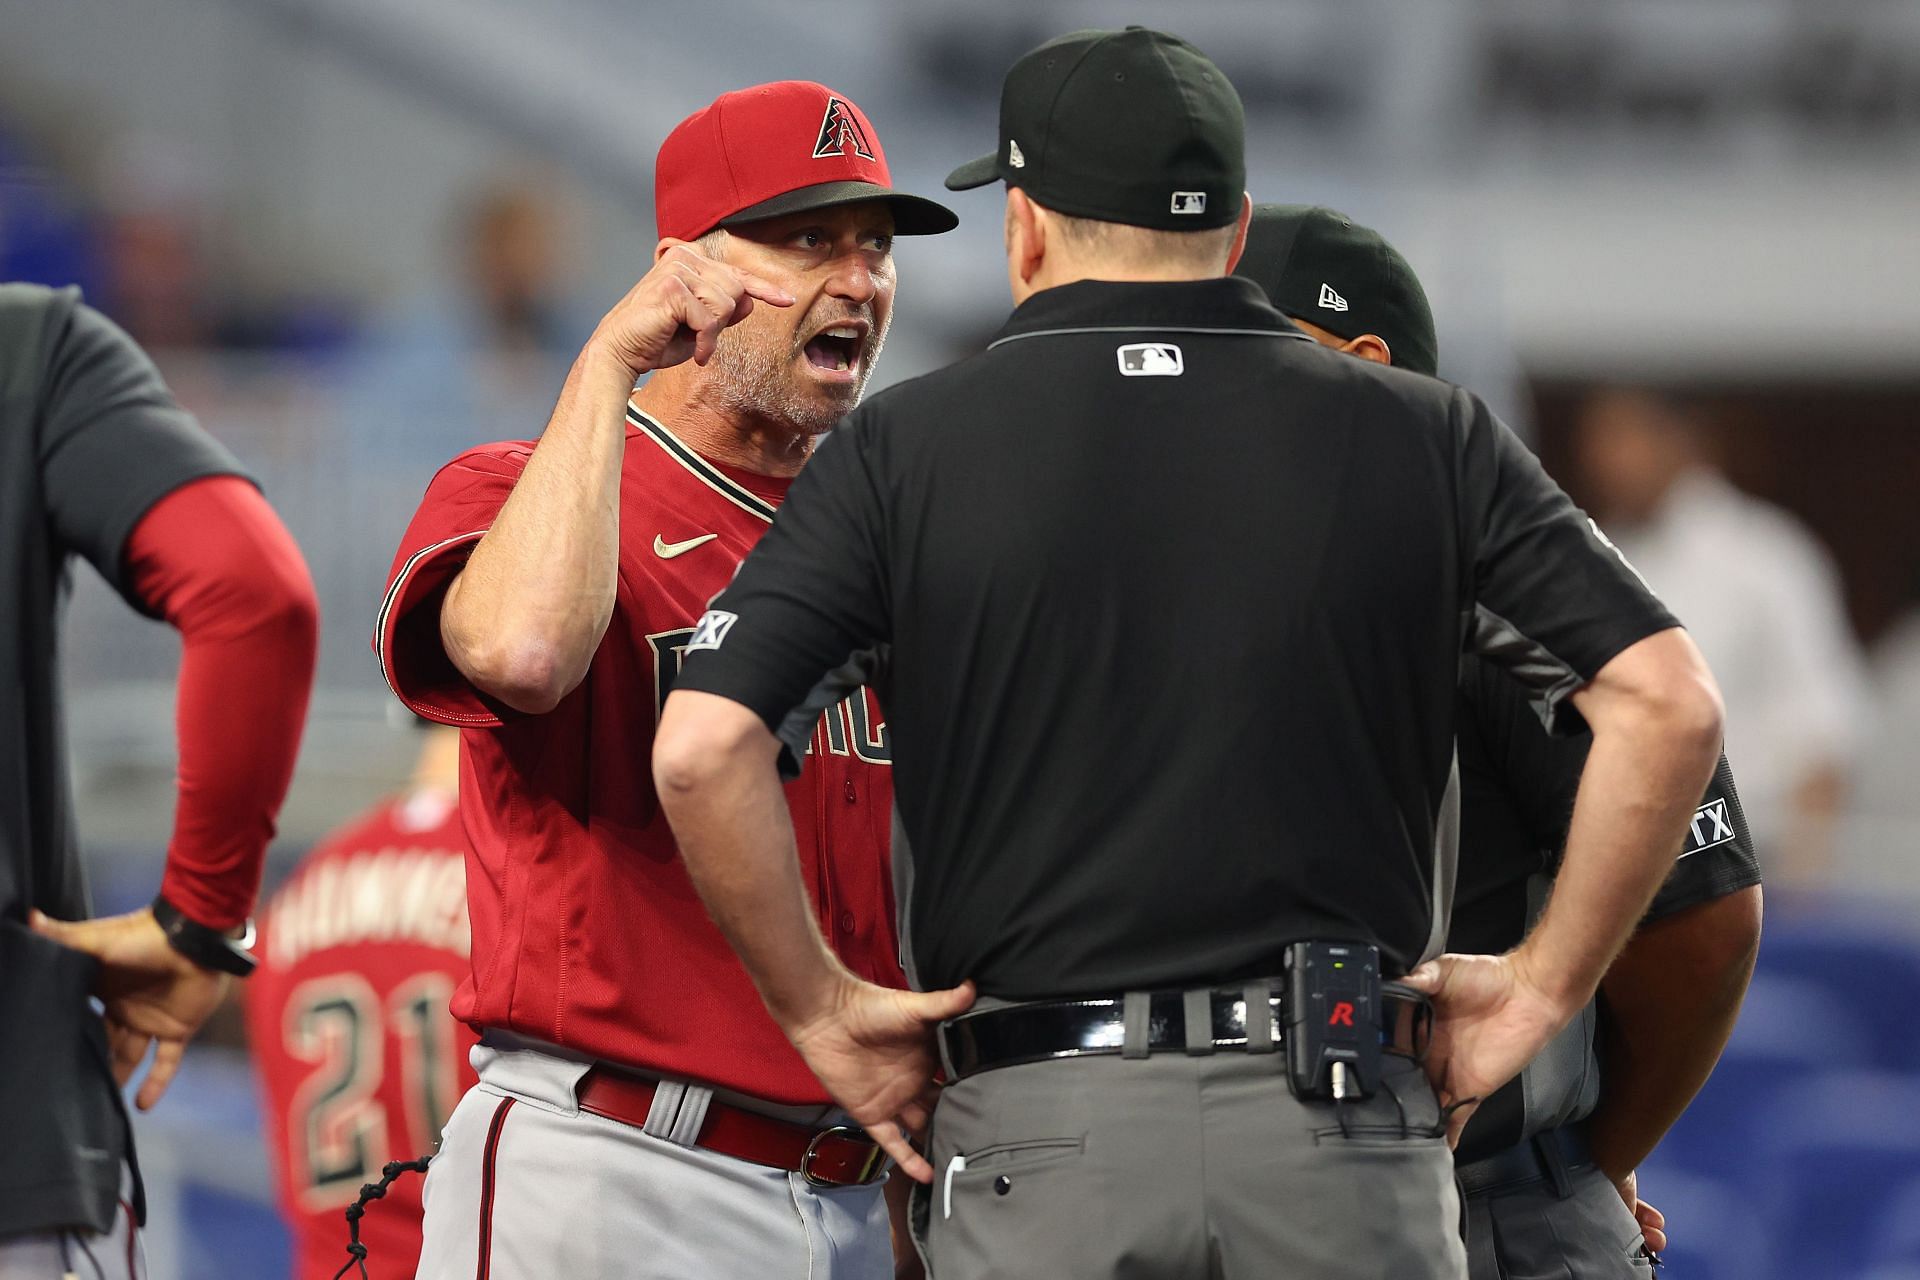 Diamondbacks manager Torey Lovullo argues with umpires after the ejection of Bumgarner in the first inning. Arizona Diamondbacks v Miami Marlins